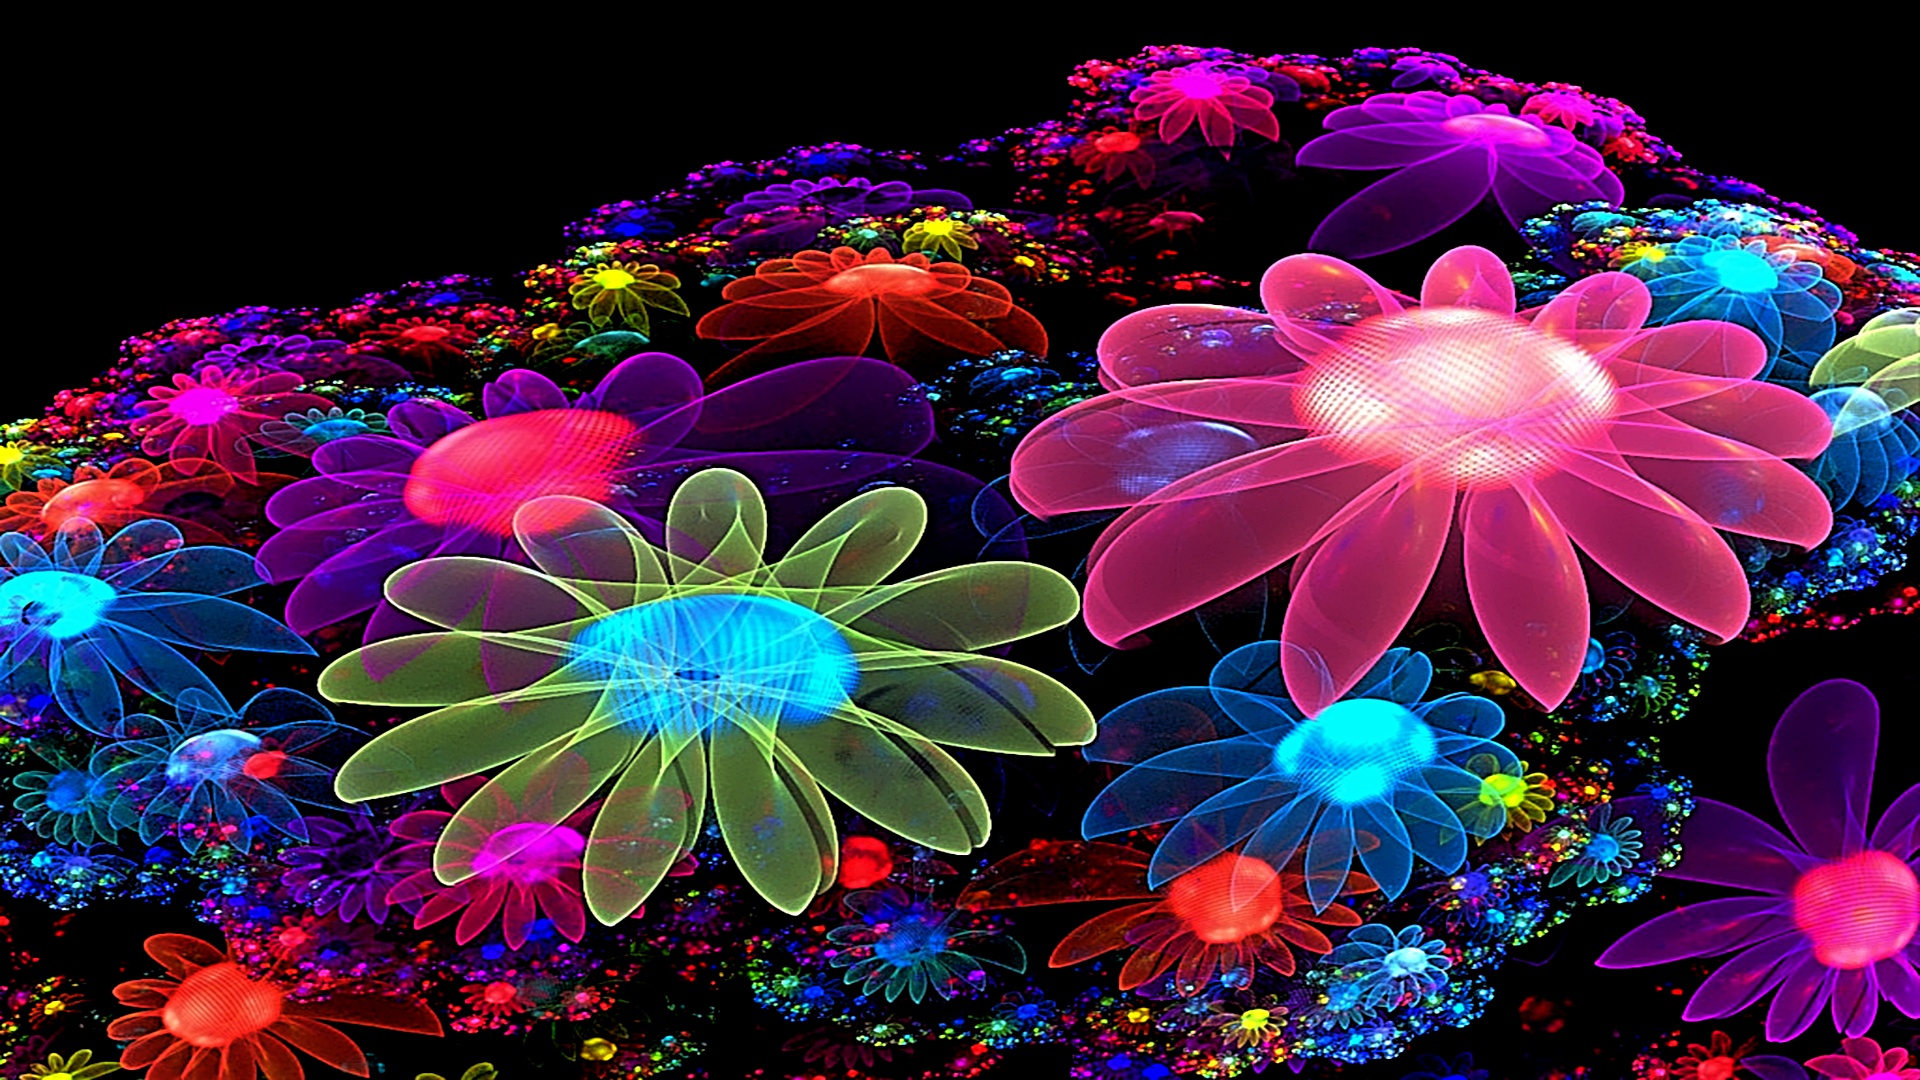 Cool Colorful Flowers Desktop Wallpapers Images 8221 HD 1920x1080